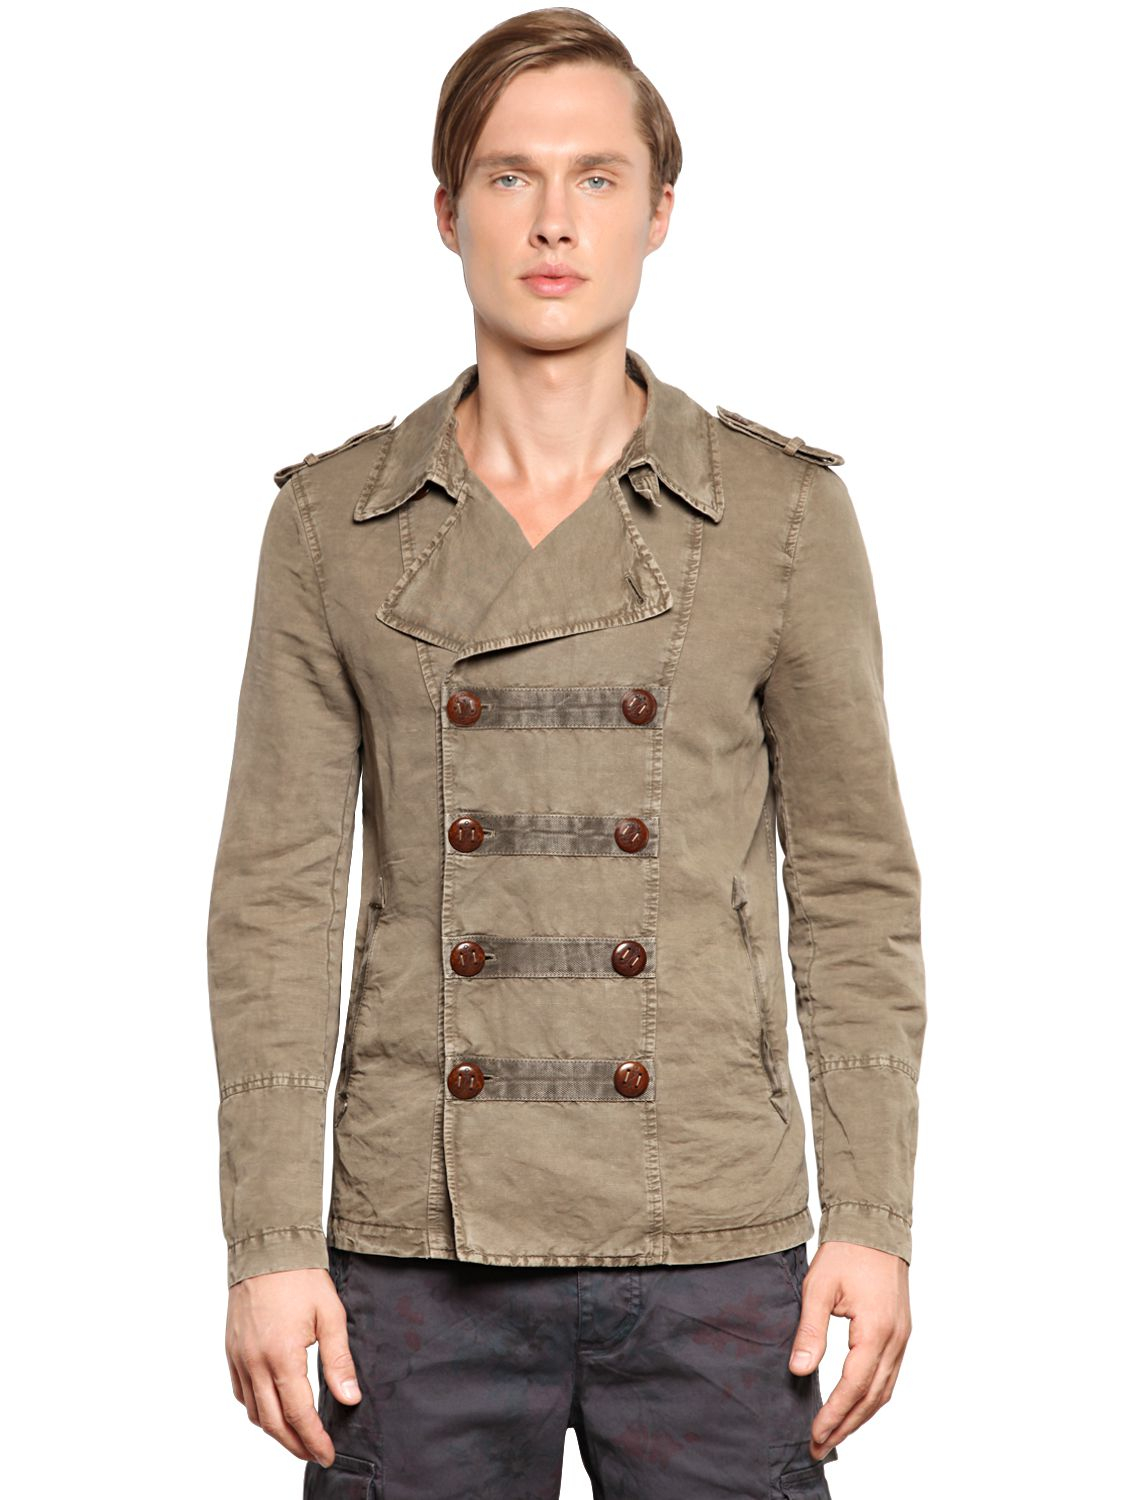 Lyst - Corto Maltese Linen Cotton Canvas Colonial Jacket in Natural for Men